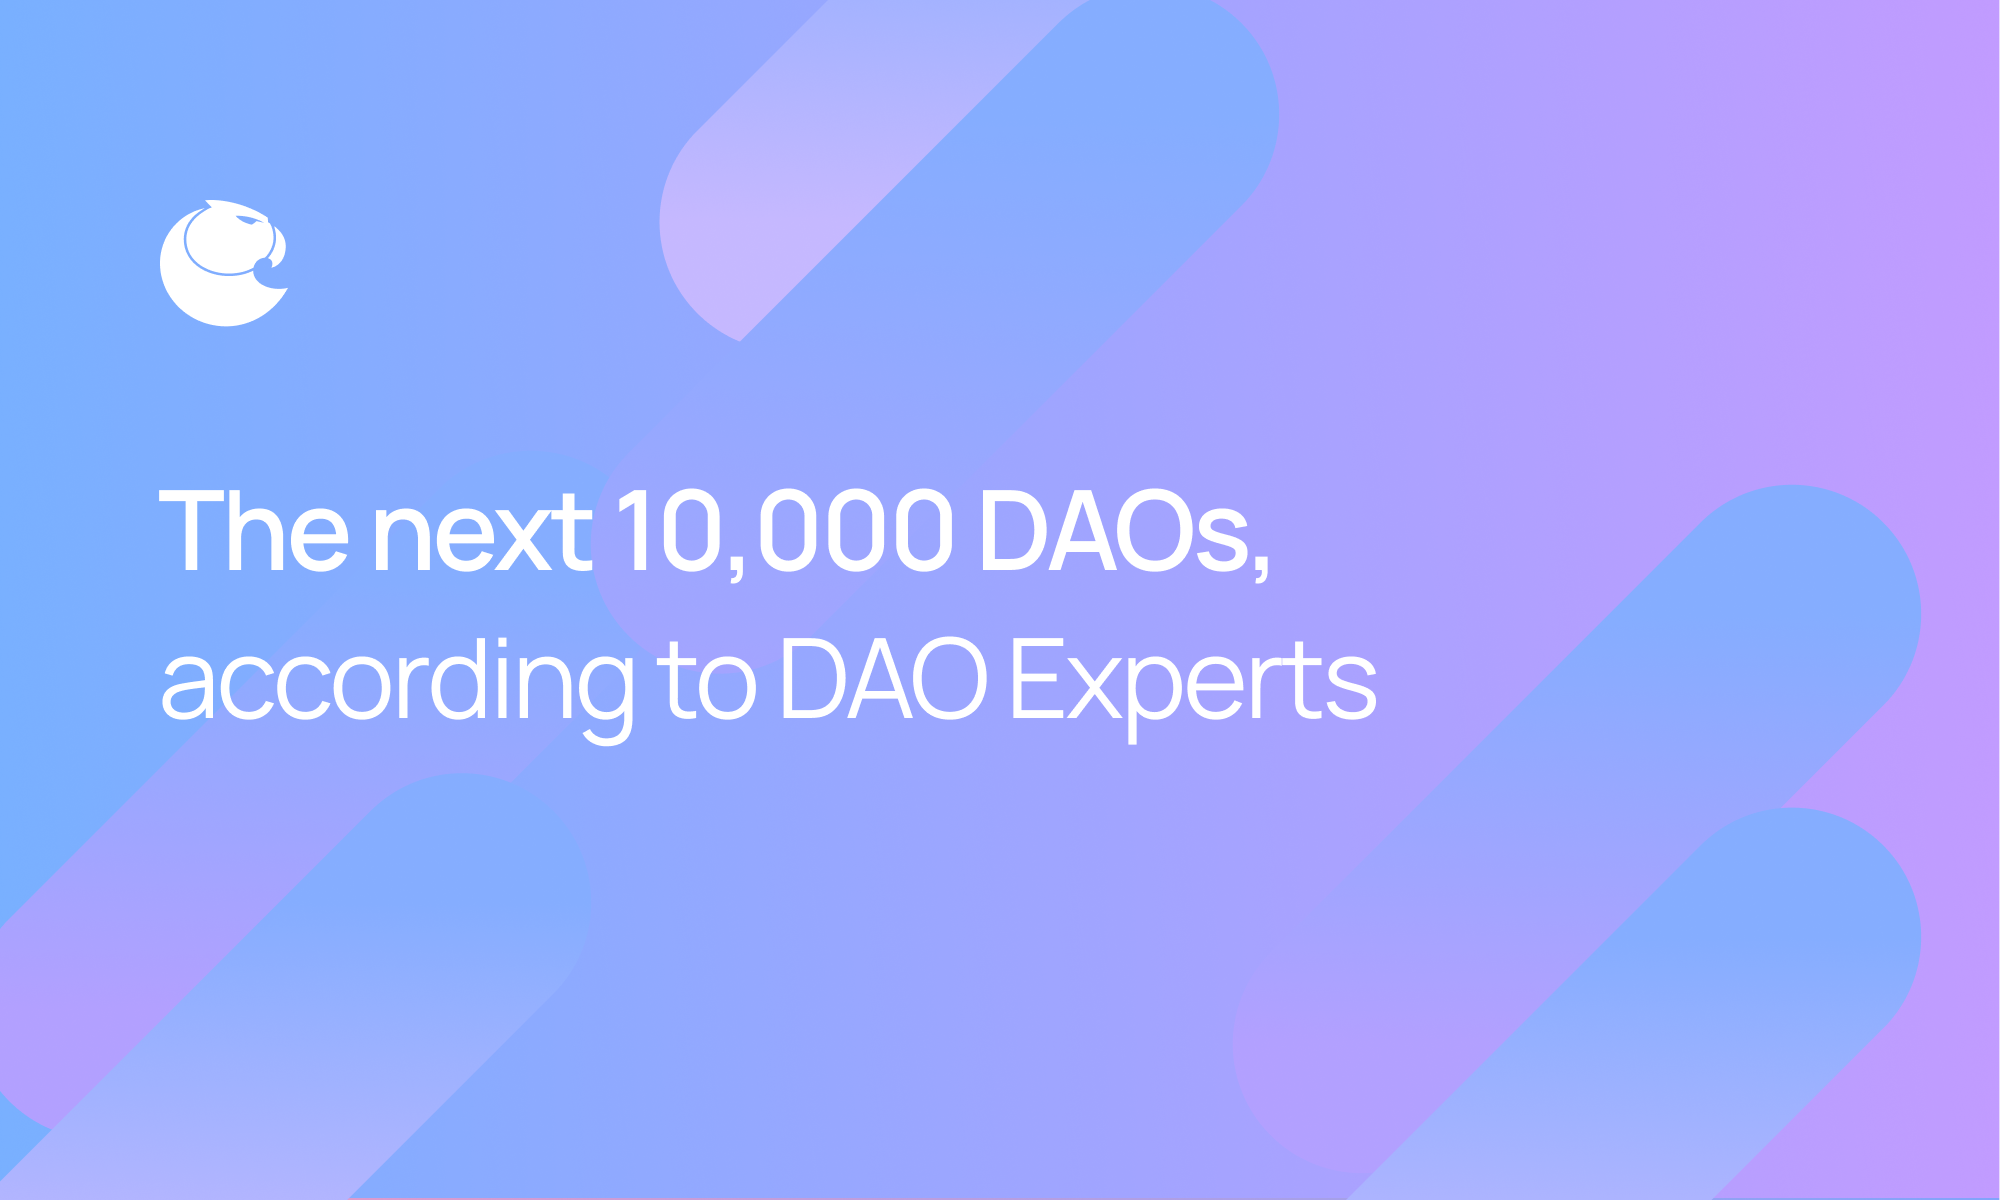 The next 10,000 DAOs, according to DAO Experts